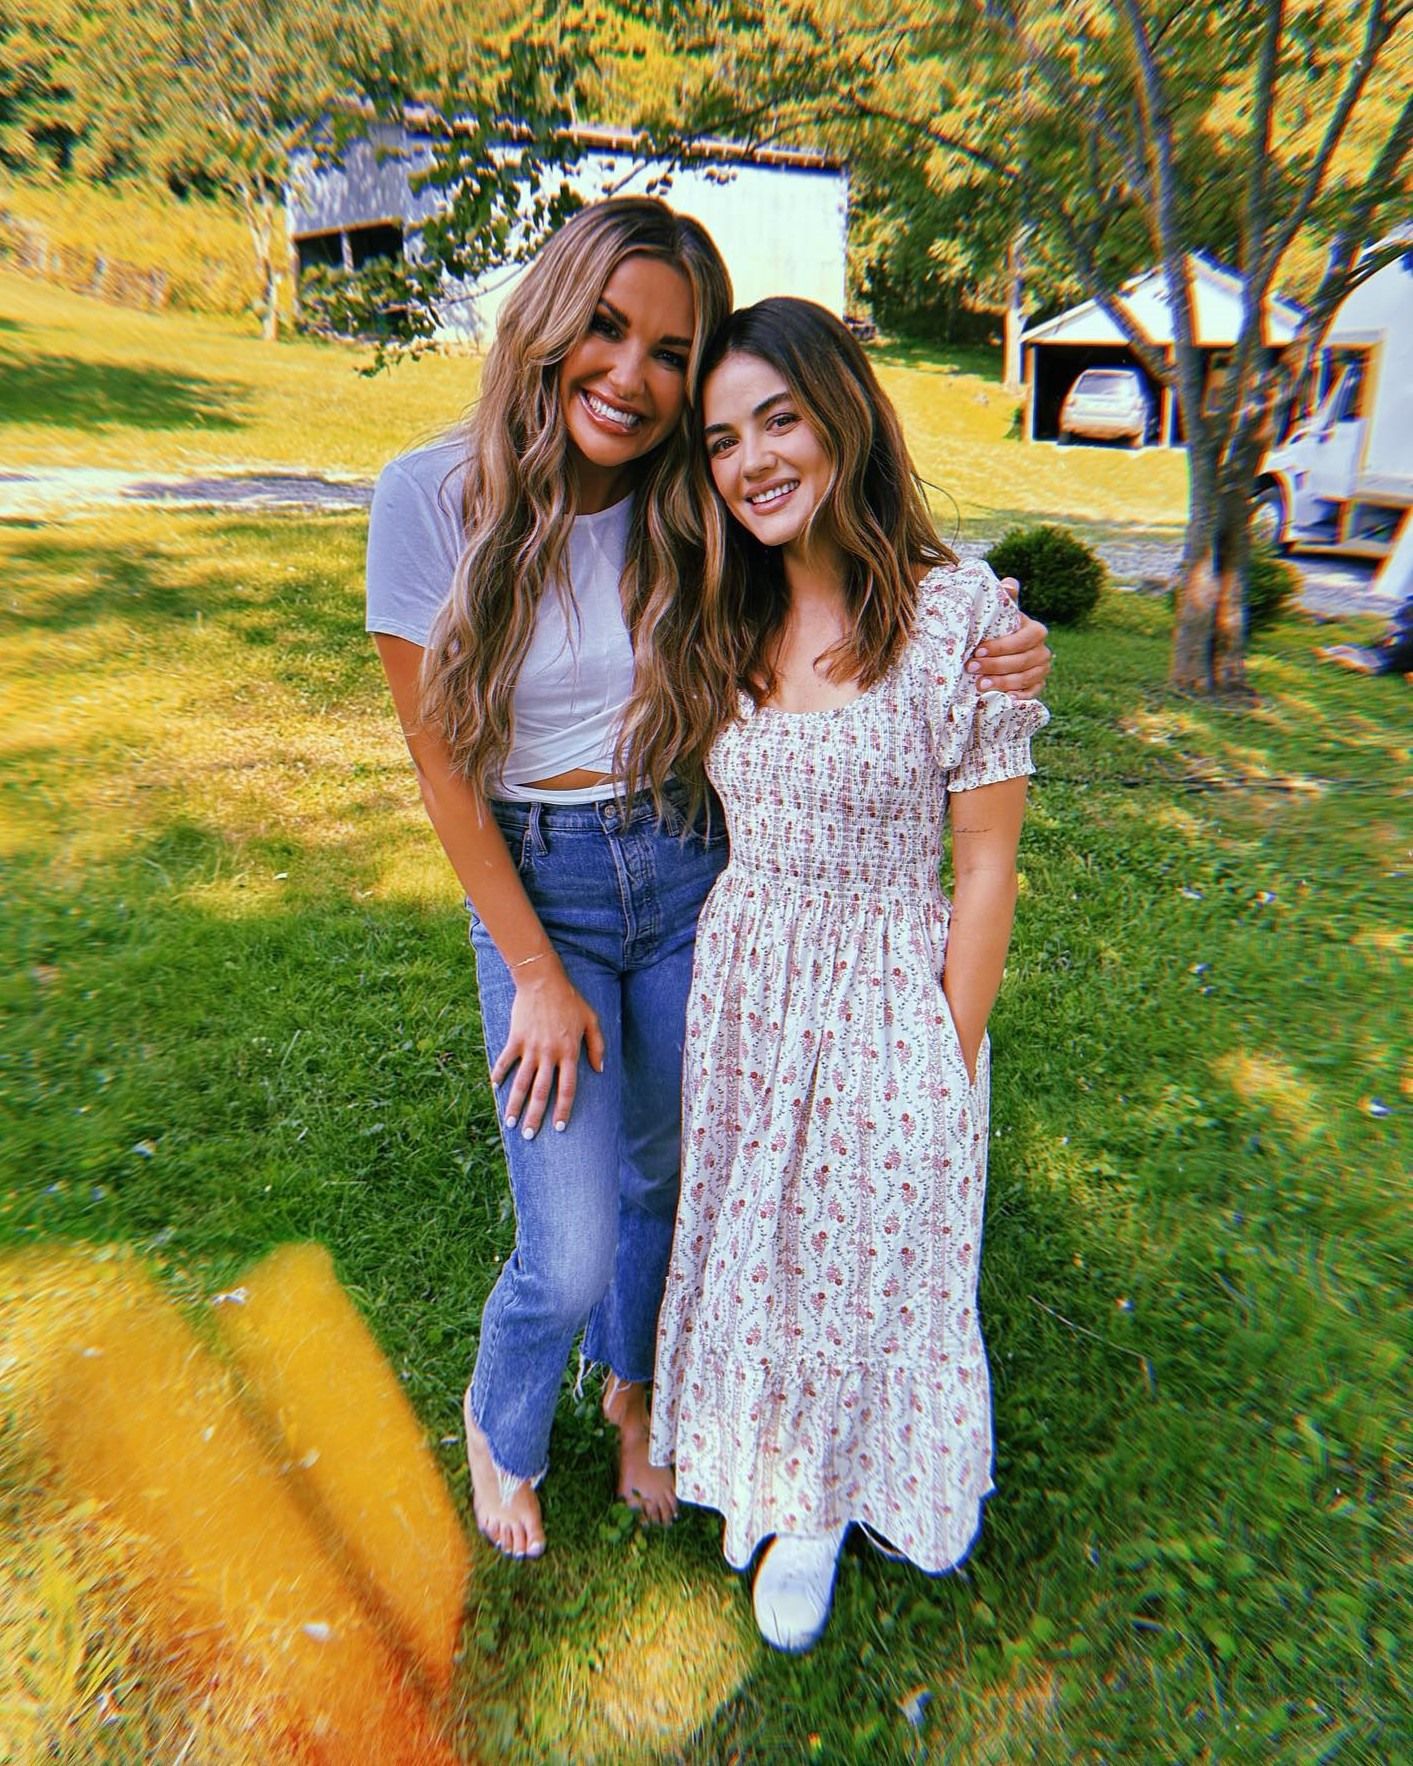 Lucy Hale - Instagram post | Carly Pearce | Caelynn Miller-Keyes style